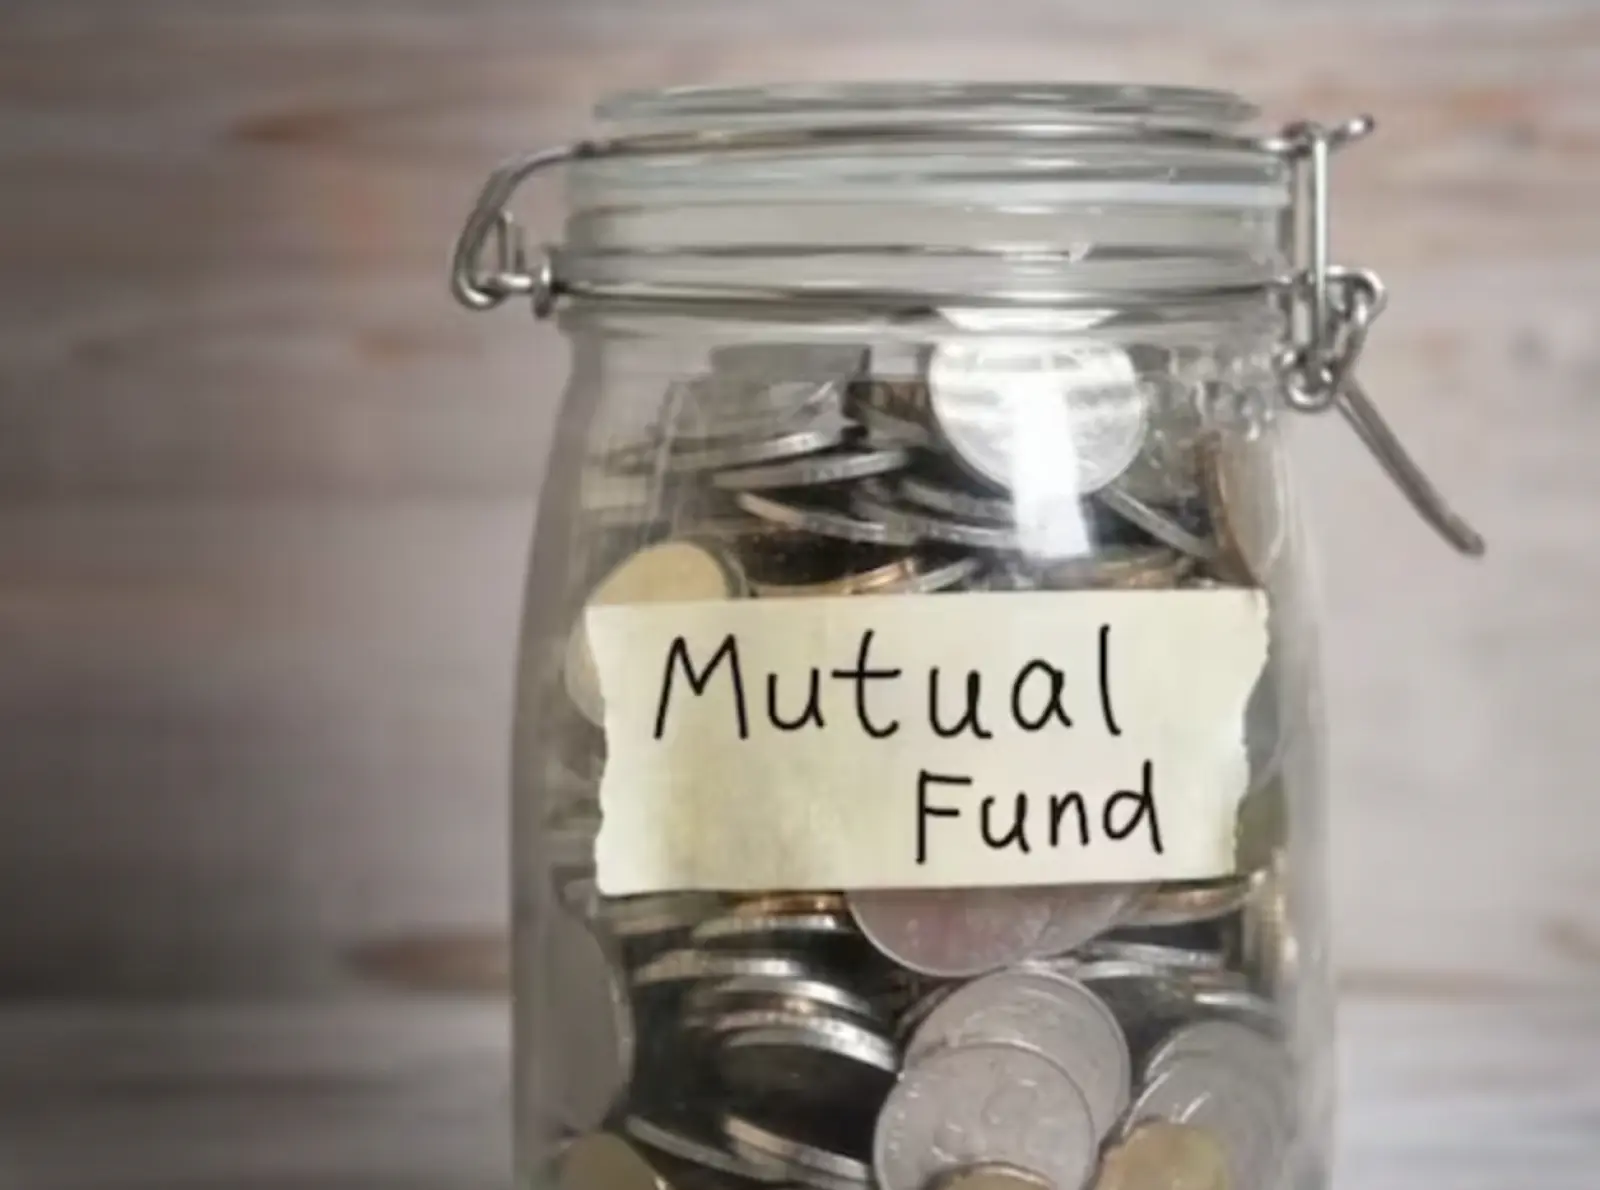 Investment of Rs 22,633 crore came in equity mutual funds in March, decrease compared to February